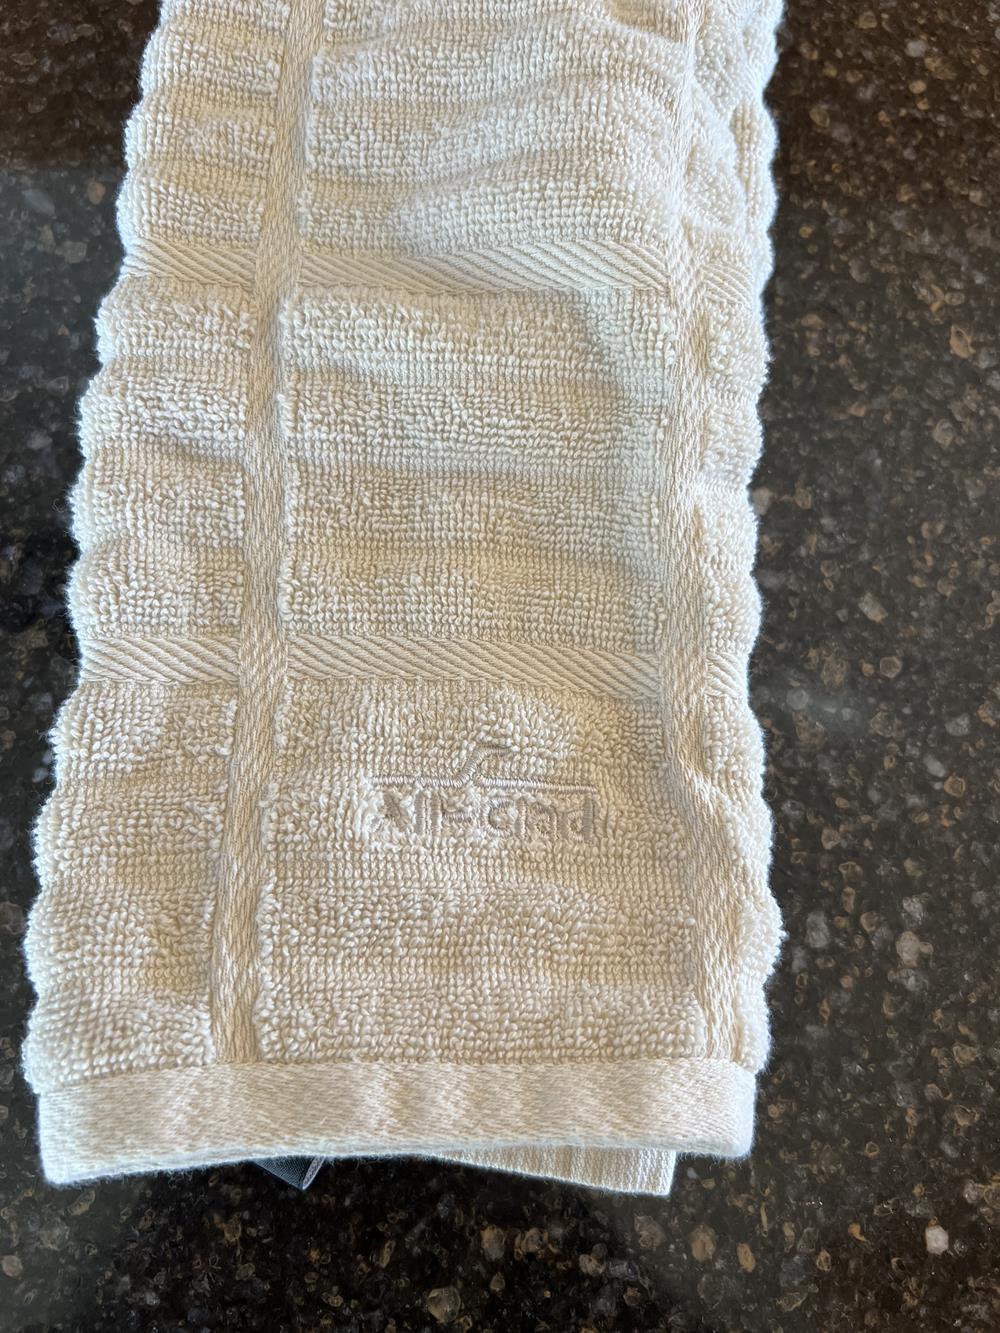 Tan all clad brand kitchen towel on counter